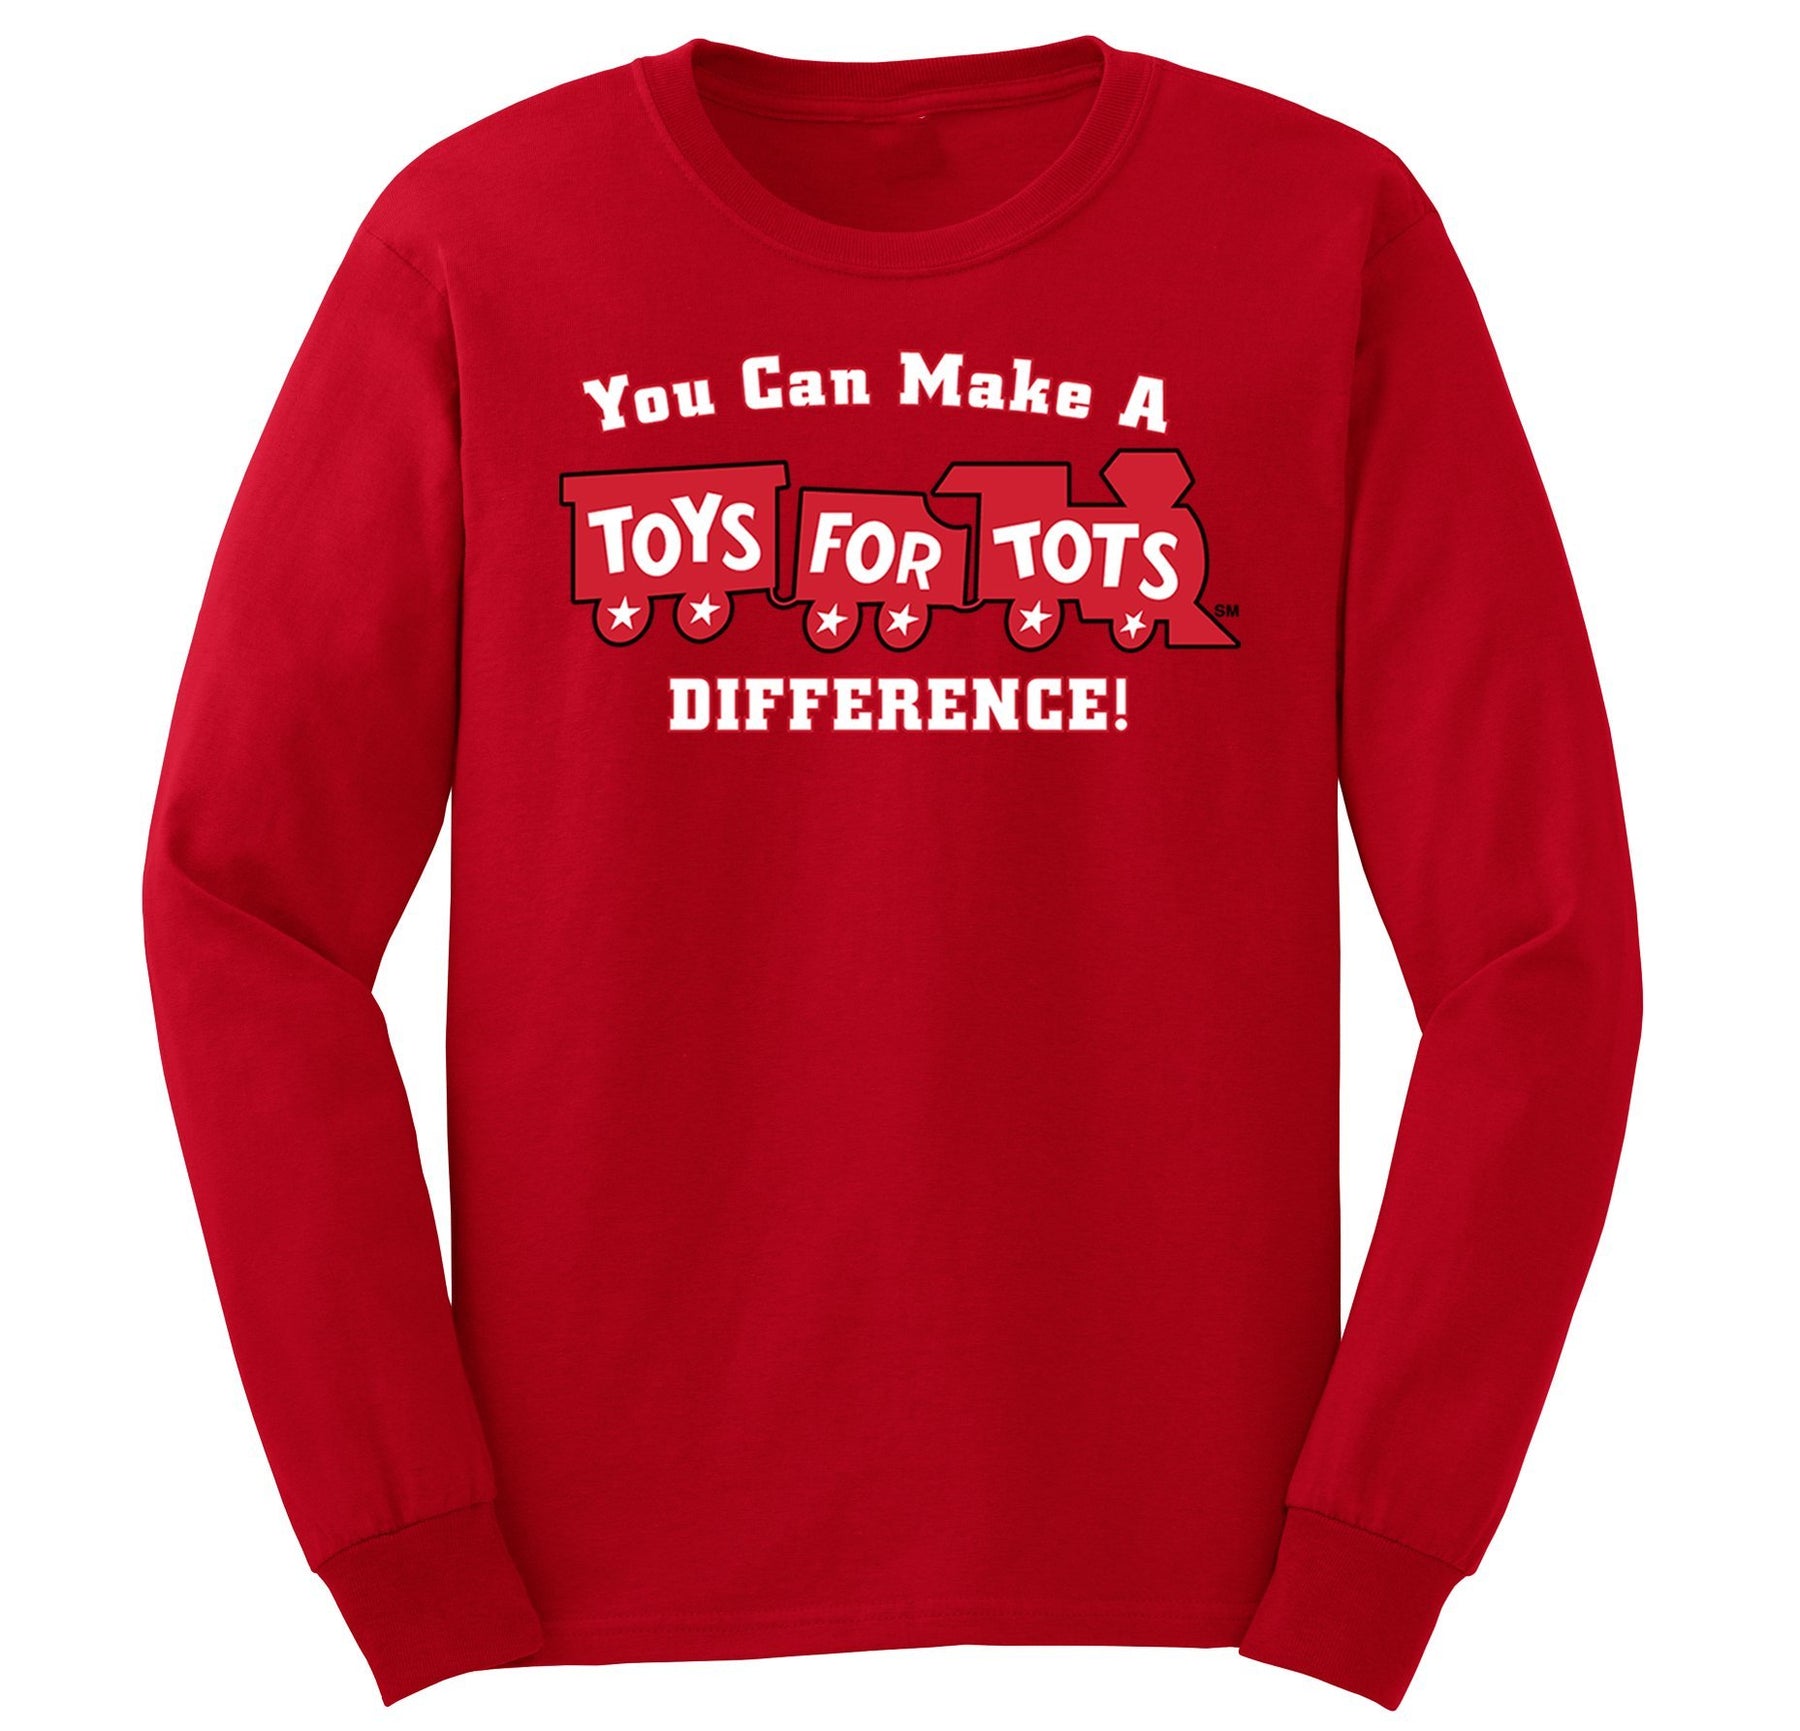 Make a Difference TFT Train Kids Long Sleeve TFT Shirt marinecorpsdirecttft S RED 